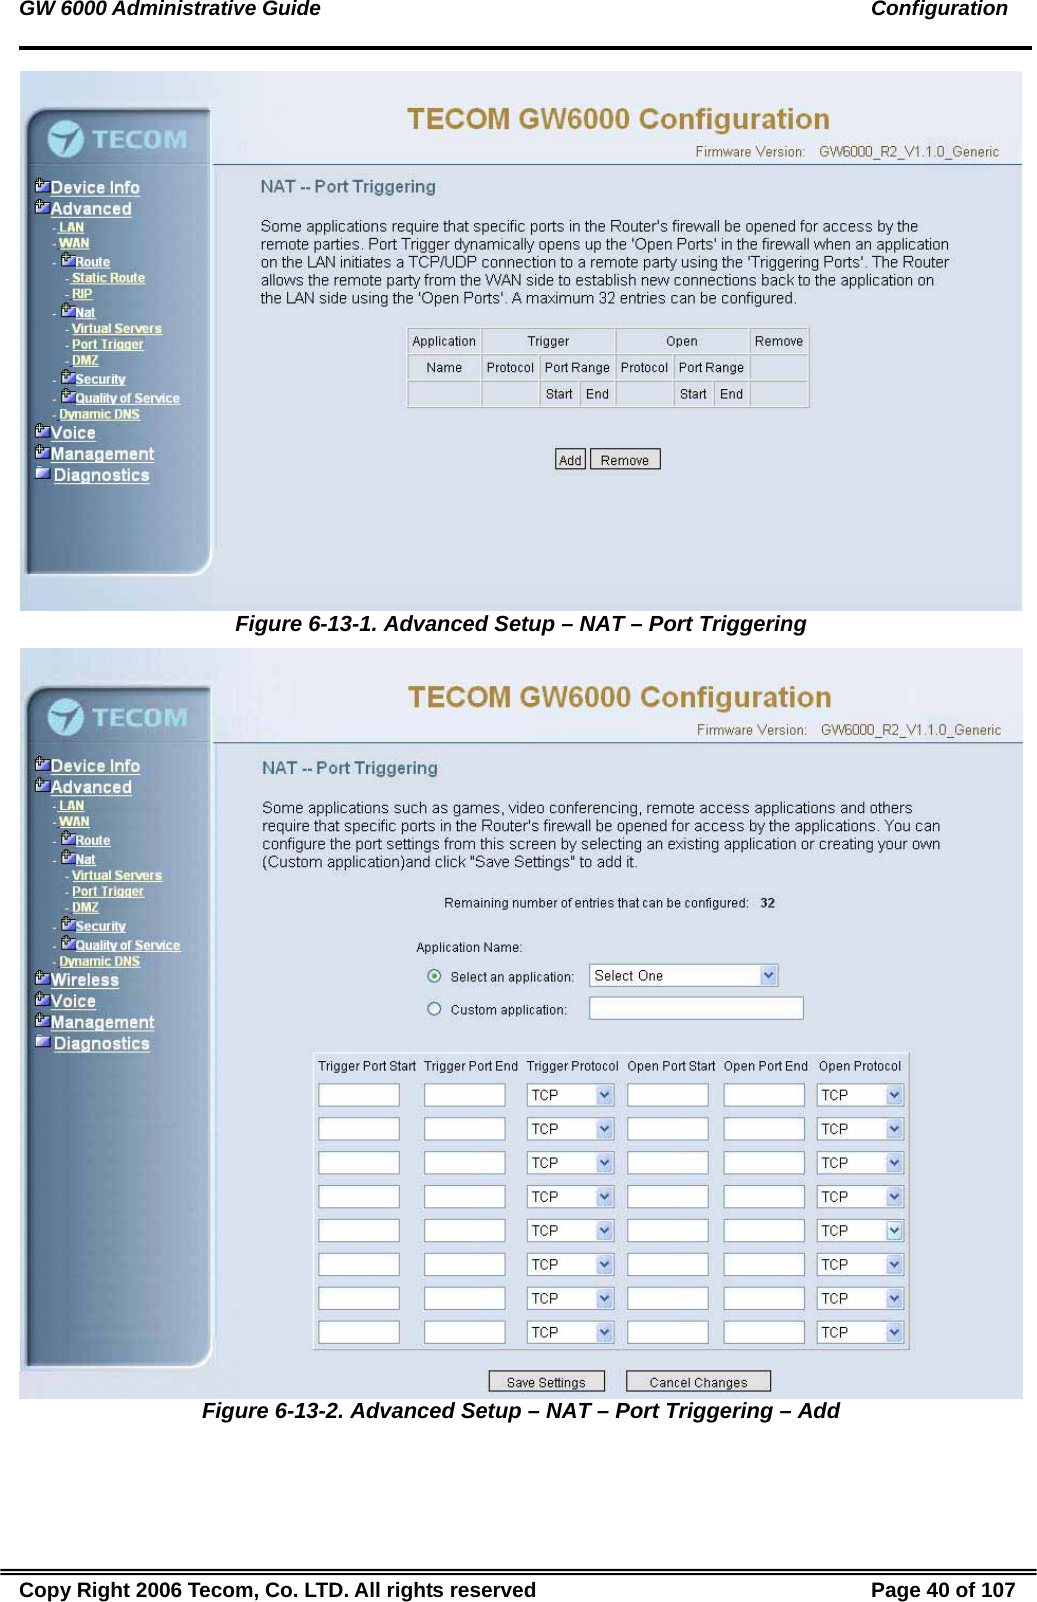 GW 6000 Administrative Guide                                                                                               Configuration  Figure 6-13-1. Advanced Setup – NAT – Port Triggering  Figure 6-13-2. Advanced Setup – NAT – Port Triggering – Add Copy Right 2006 Tecom, Co. LTD. All rights reserved  Page 40 of 107 